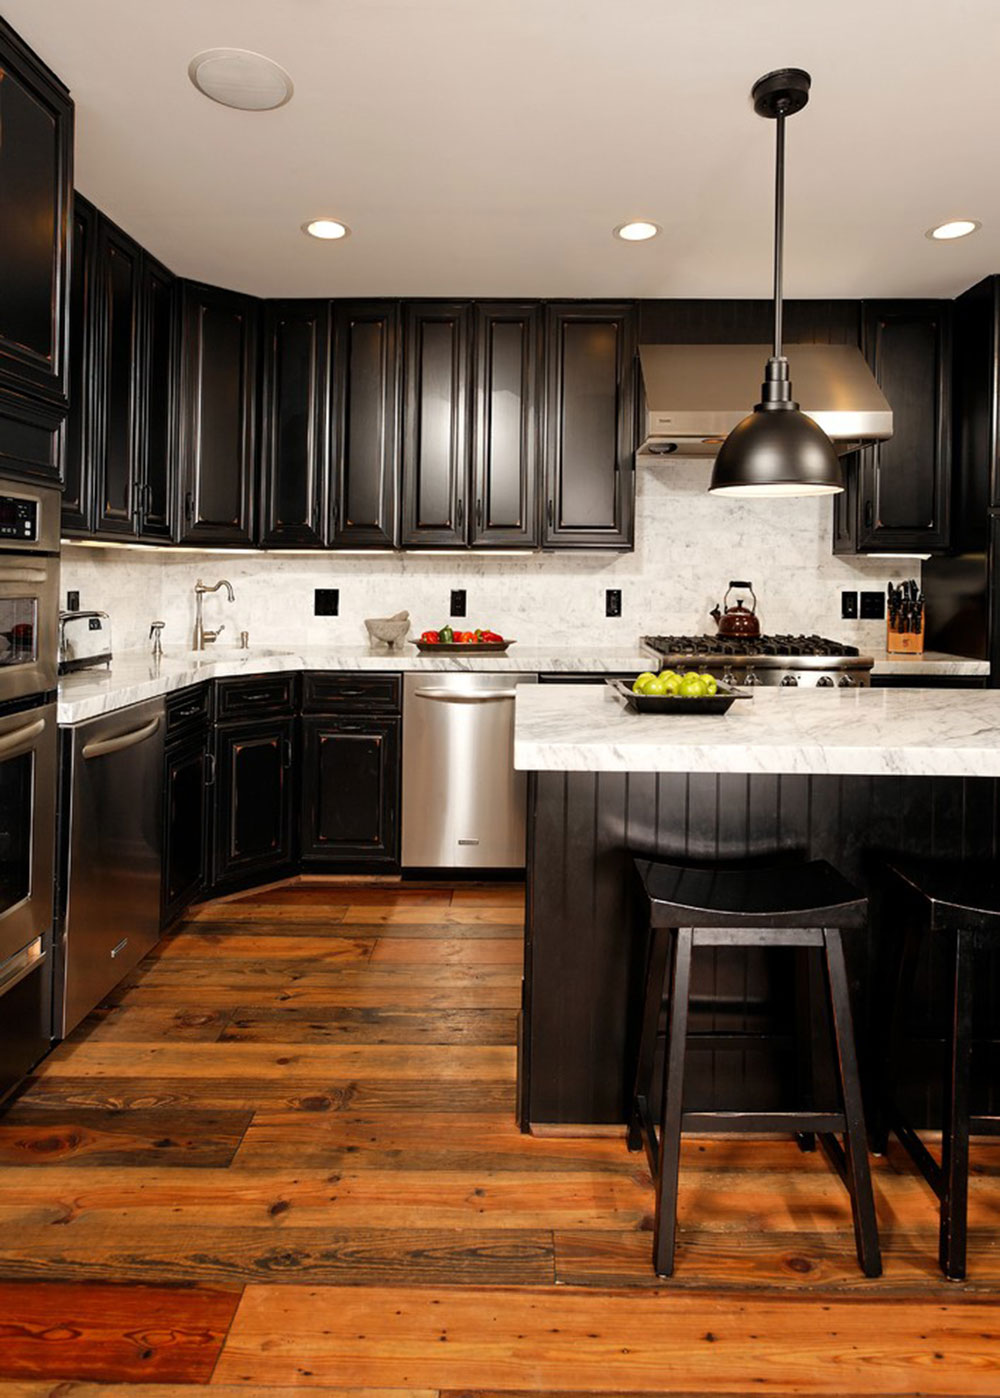 Kitchens-with-black-cupboards-can-still-be-bright9 Kitchens with-black cupboards - pictures and ideas